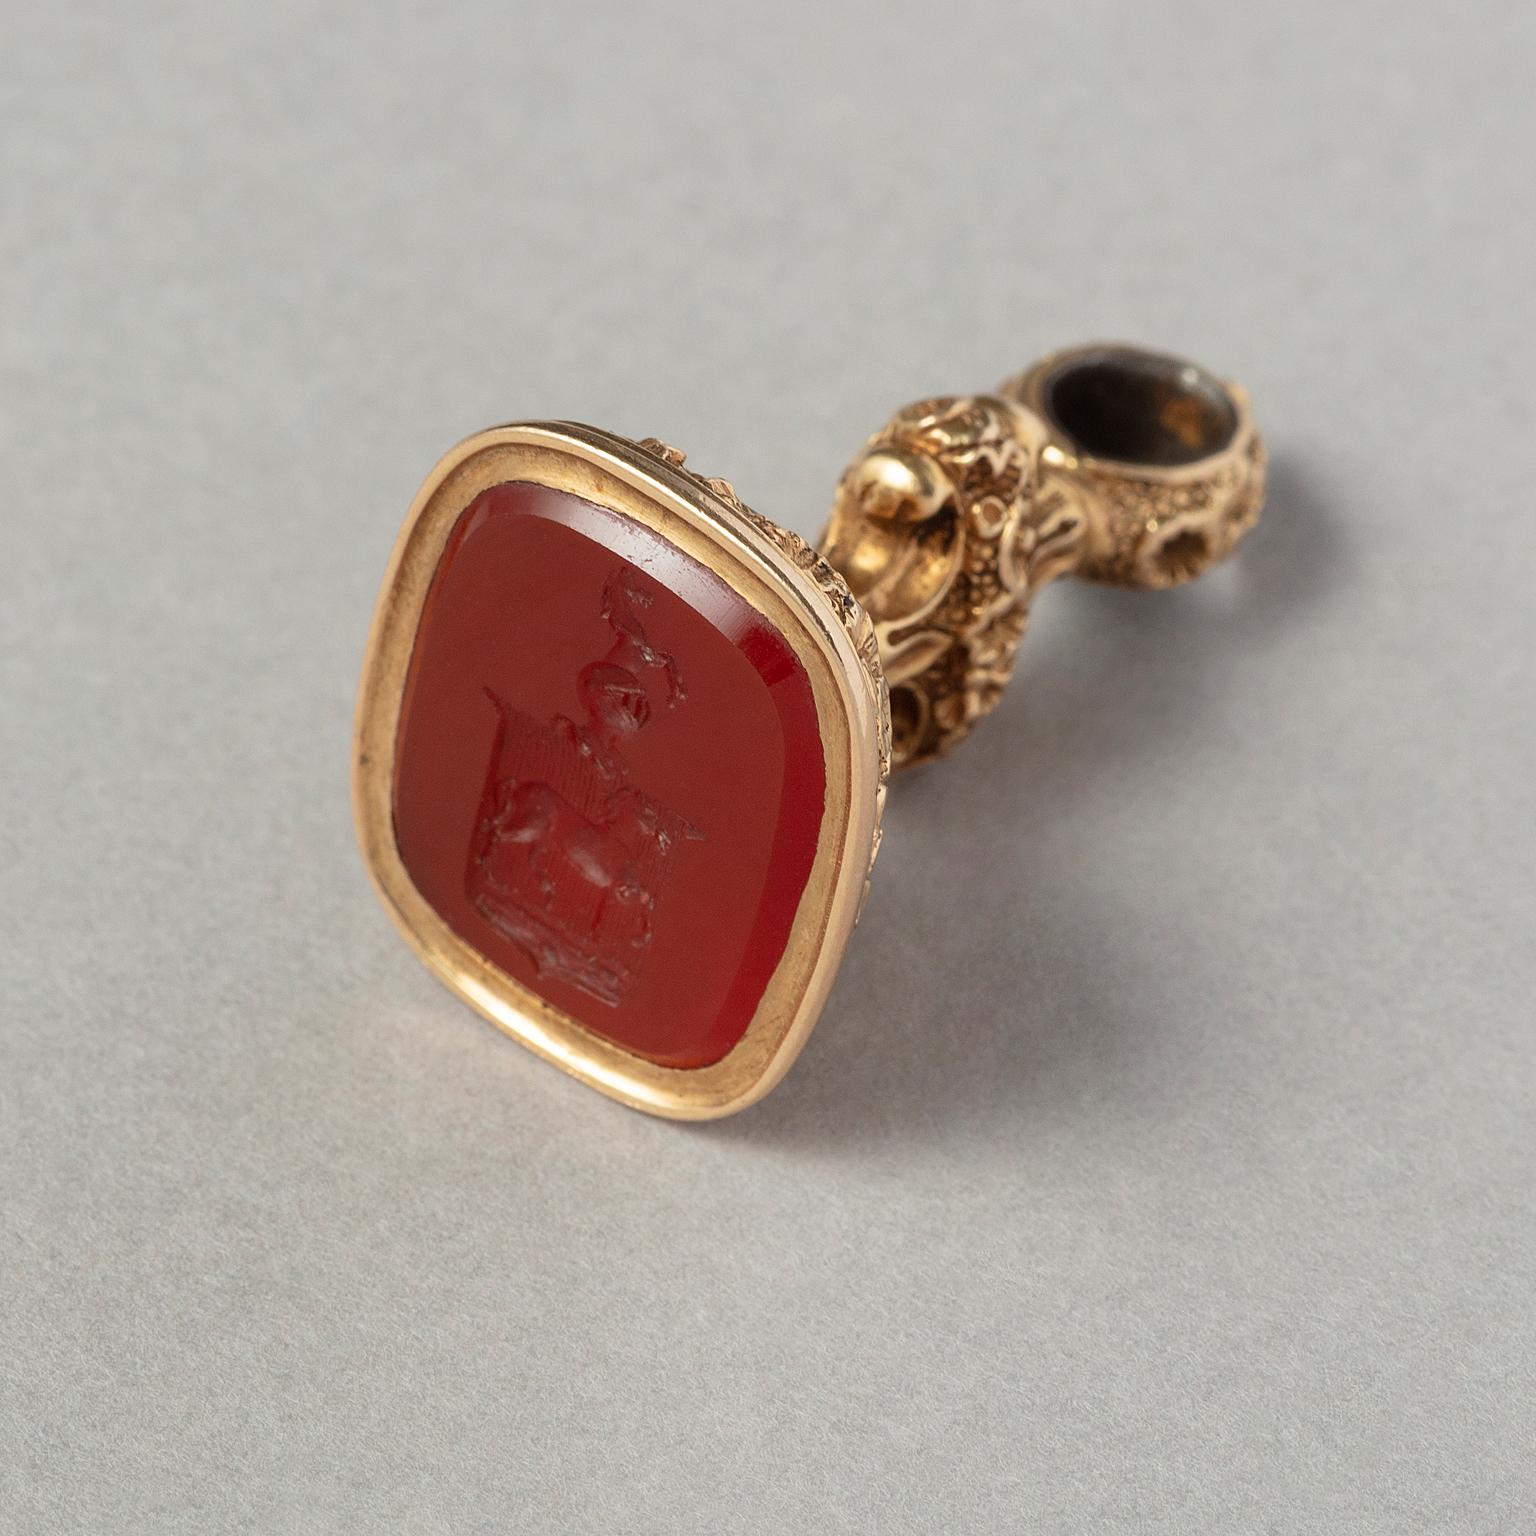 Women's or Men's A Victorian Gold and Carnelian Seal with a Horse Crest